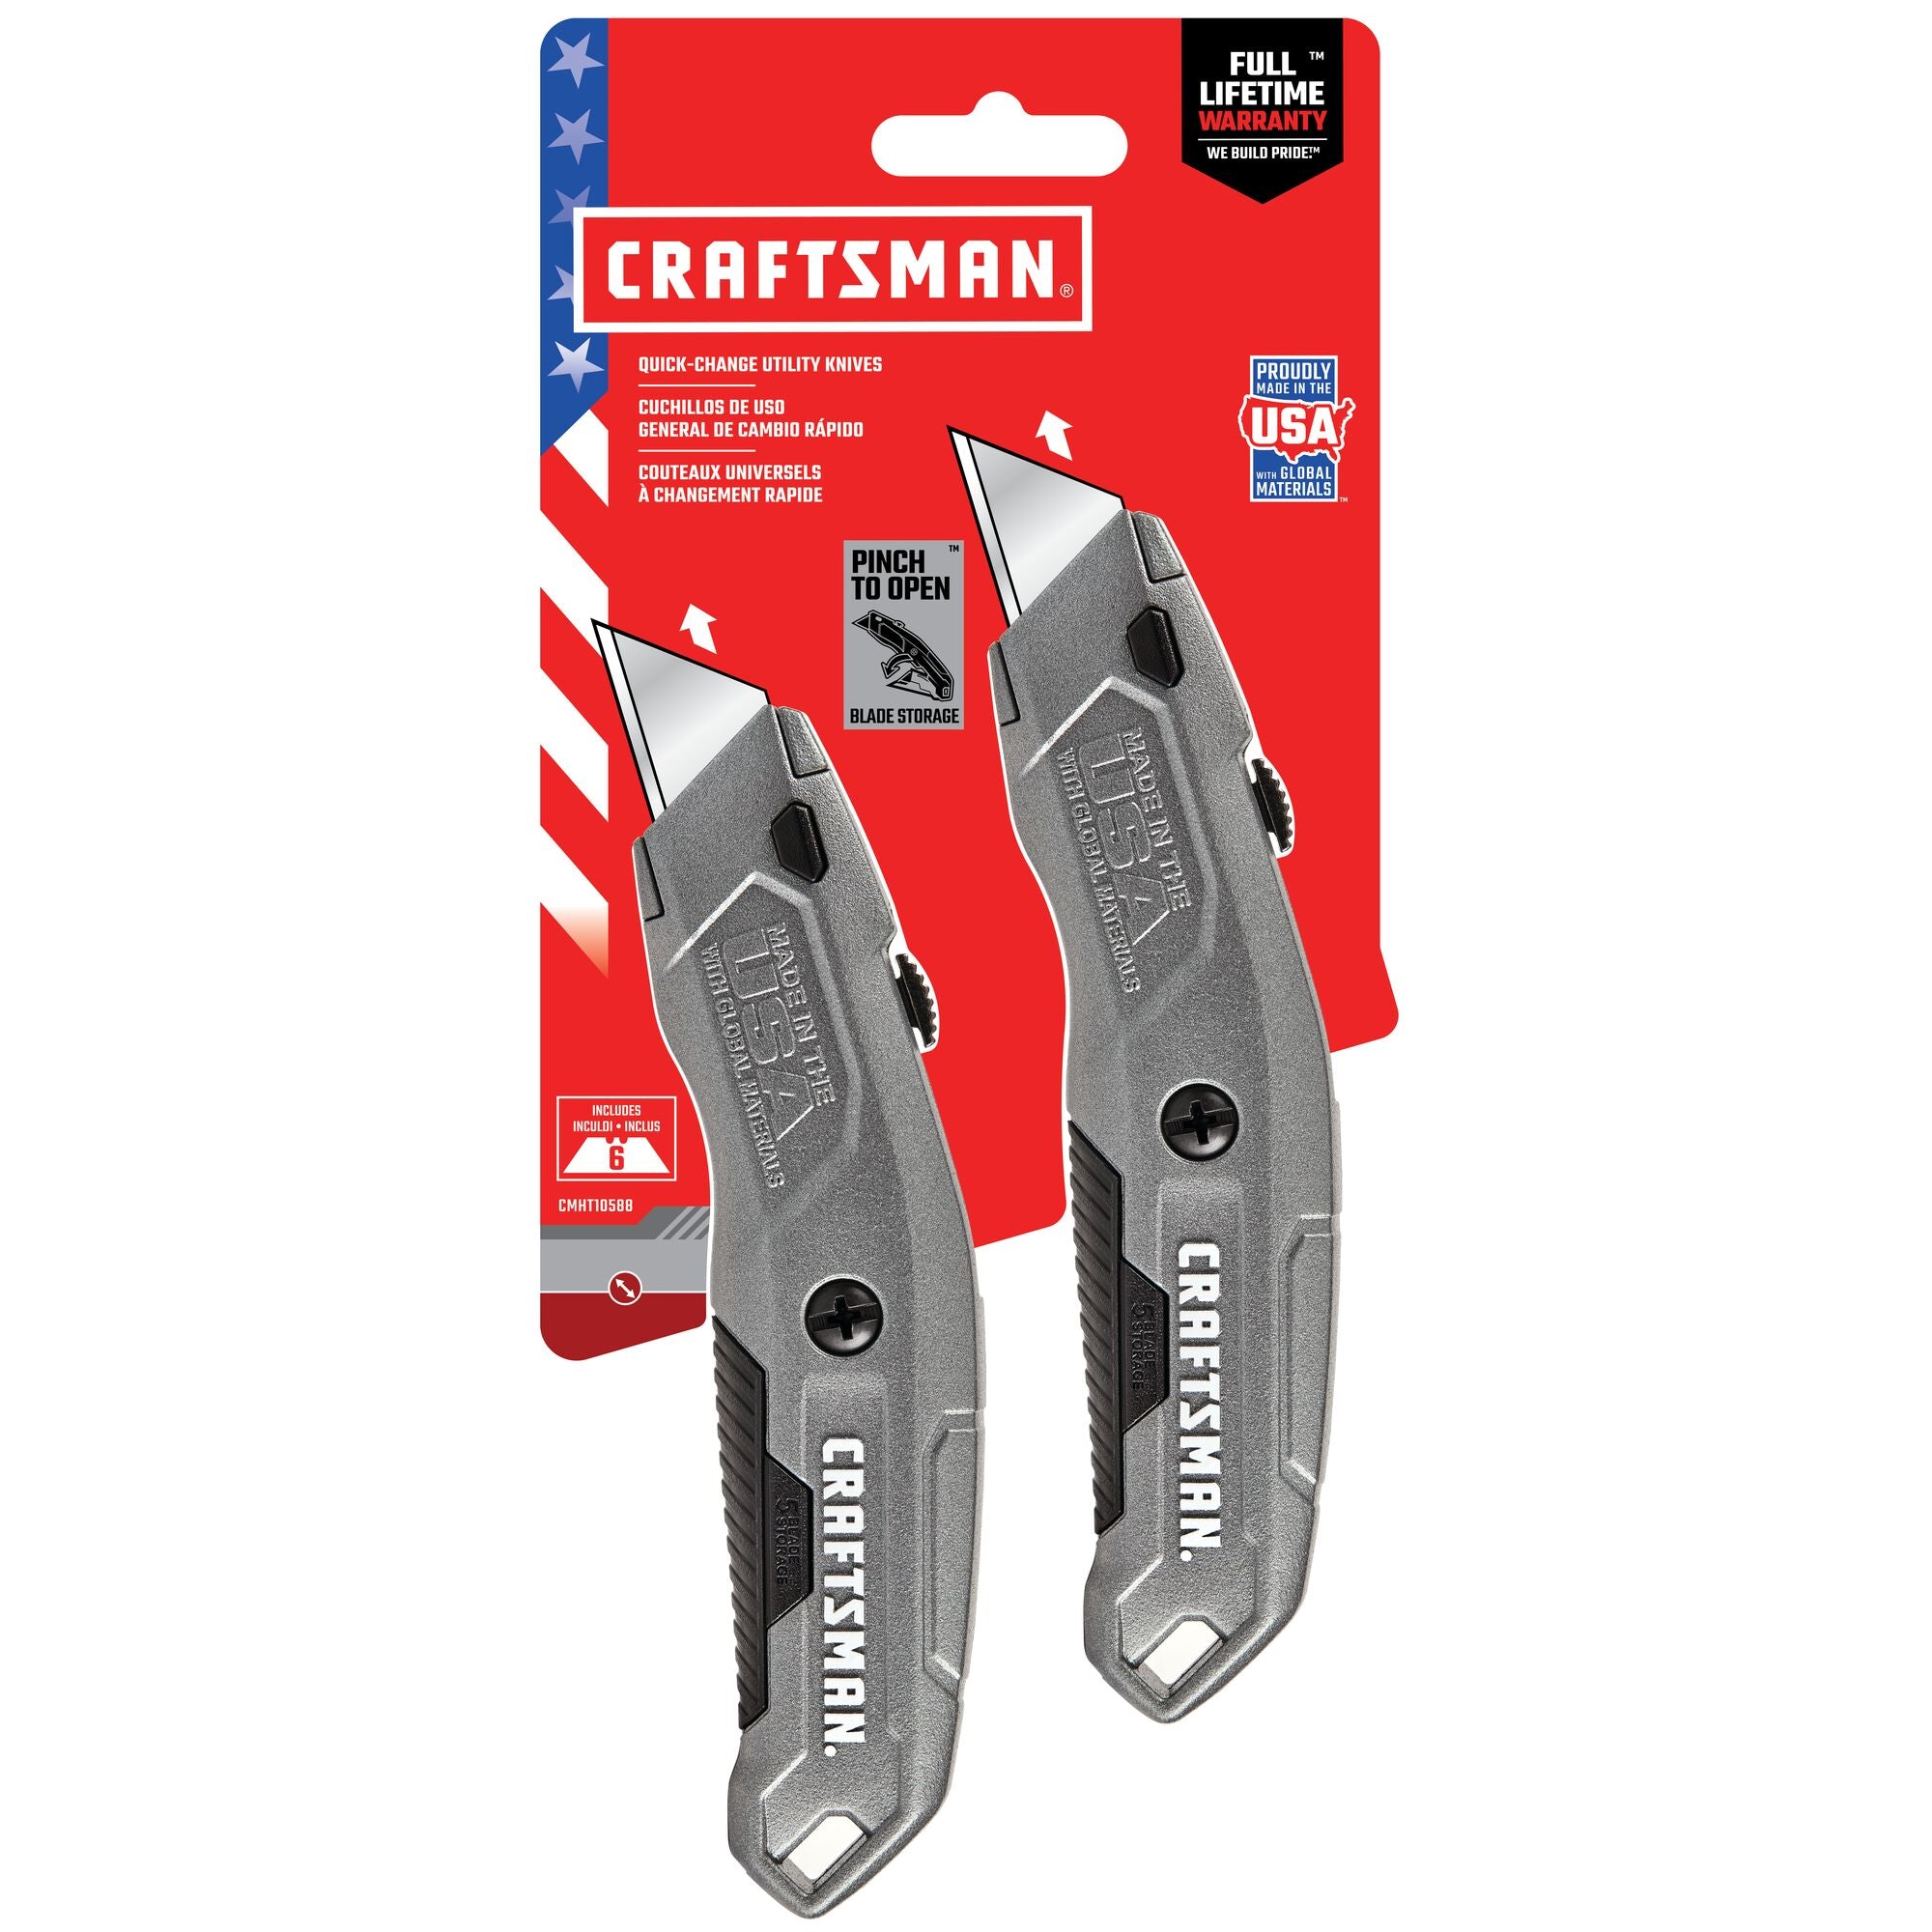 2 pack quick change utility knife in plastic packaging.